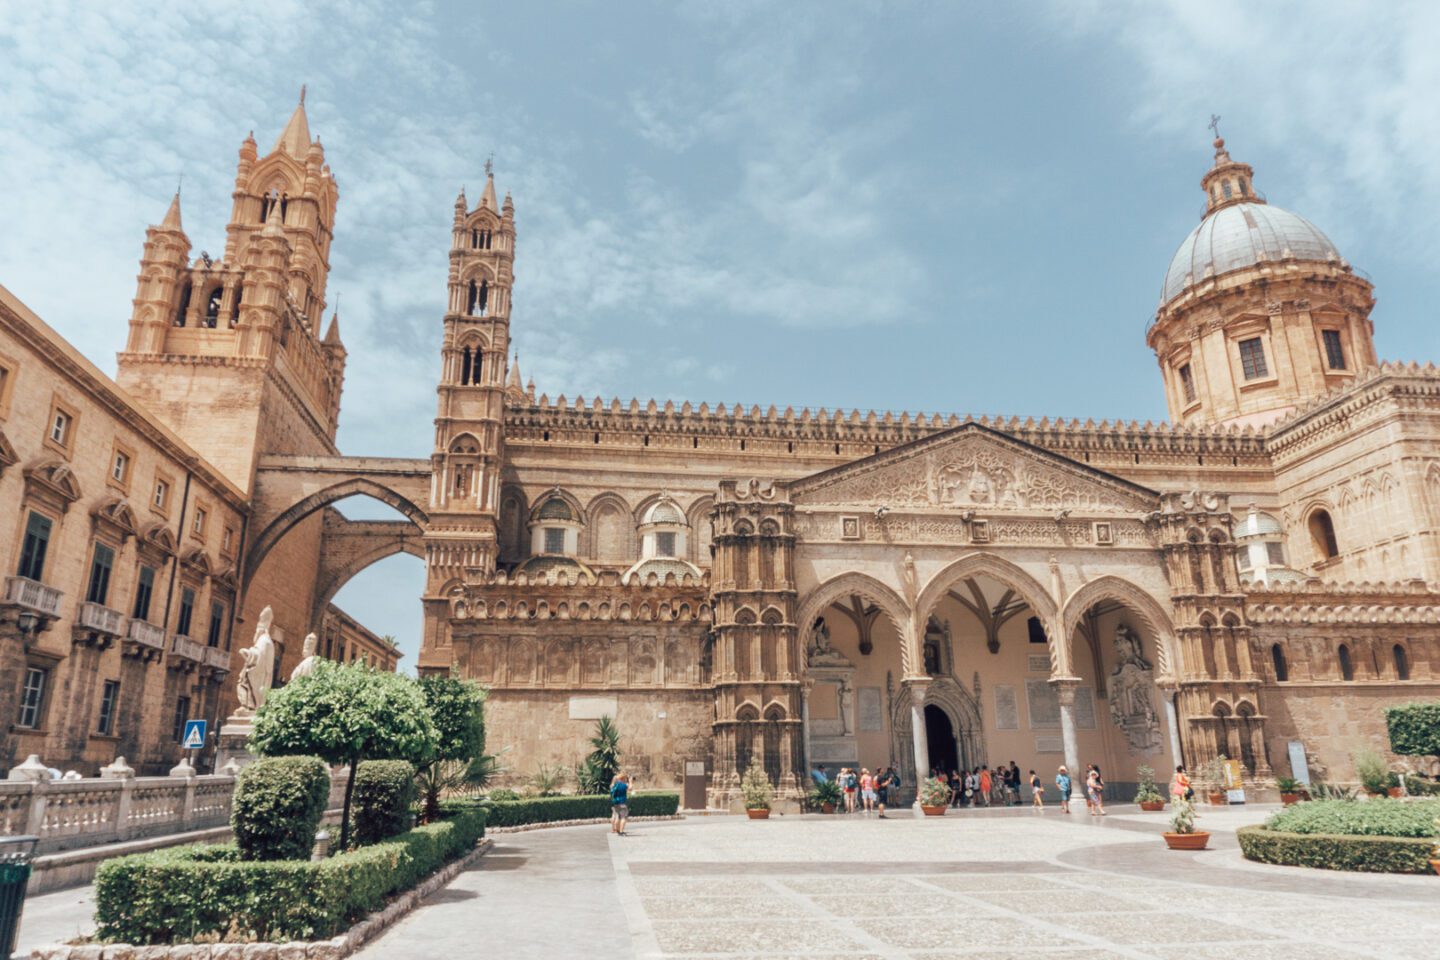 The 12th century Palermo Cathedral boasts stunning Gothic architecture in Sicily - A must see on this 7-day Sicily itinerary